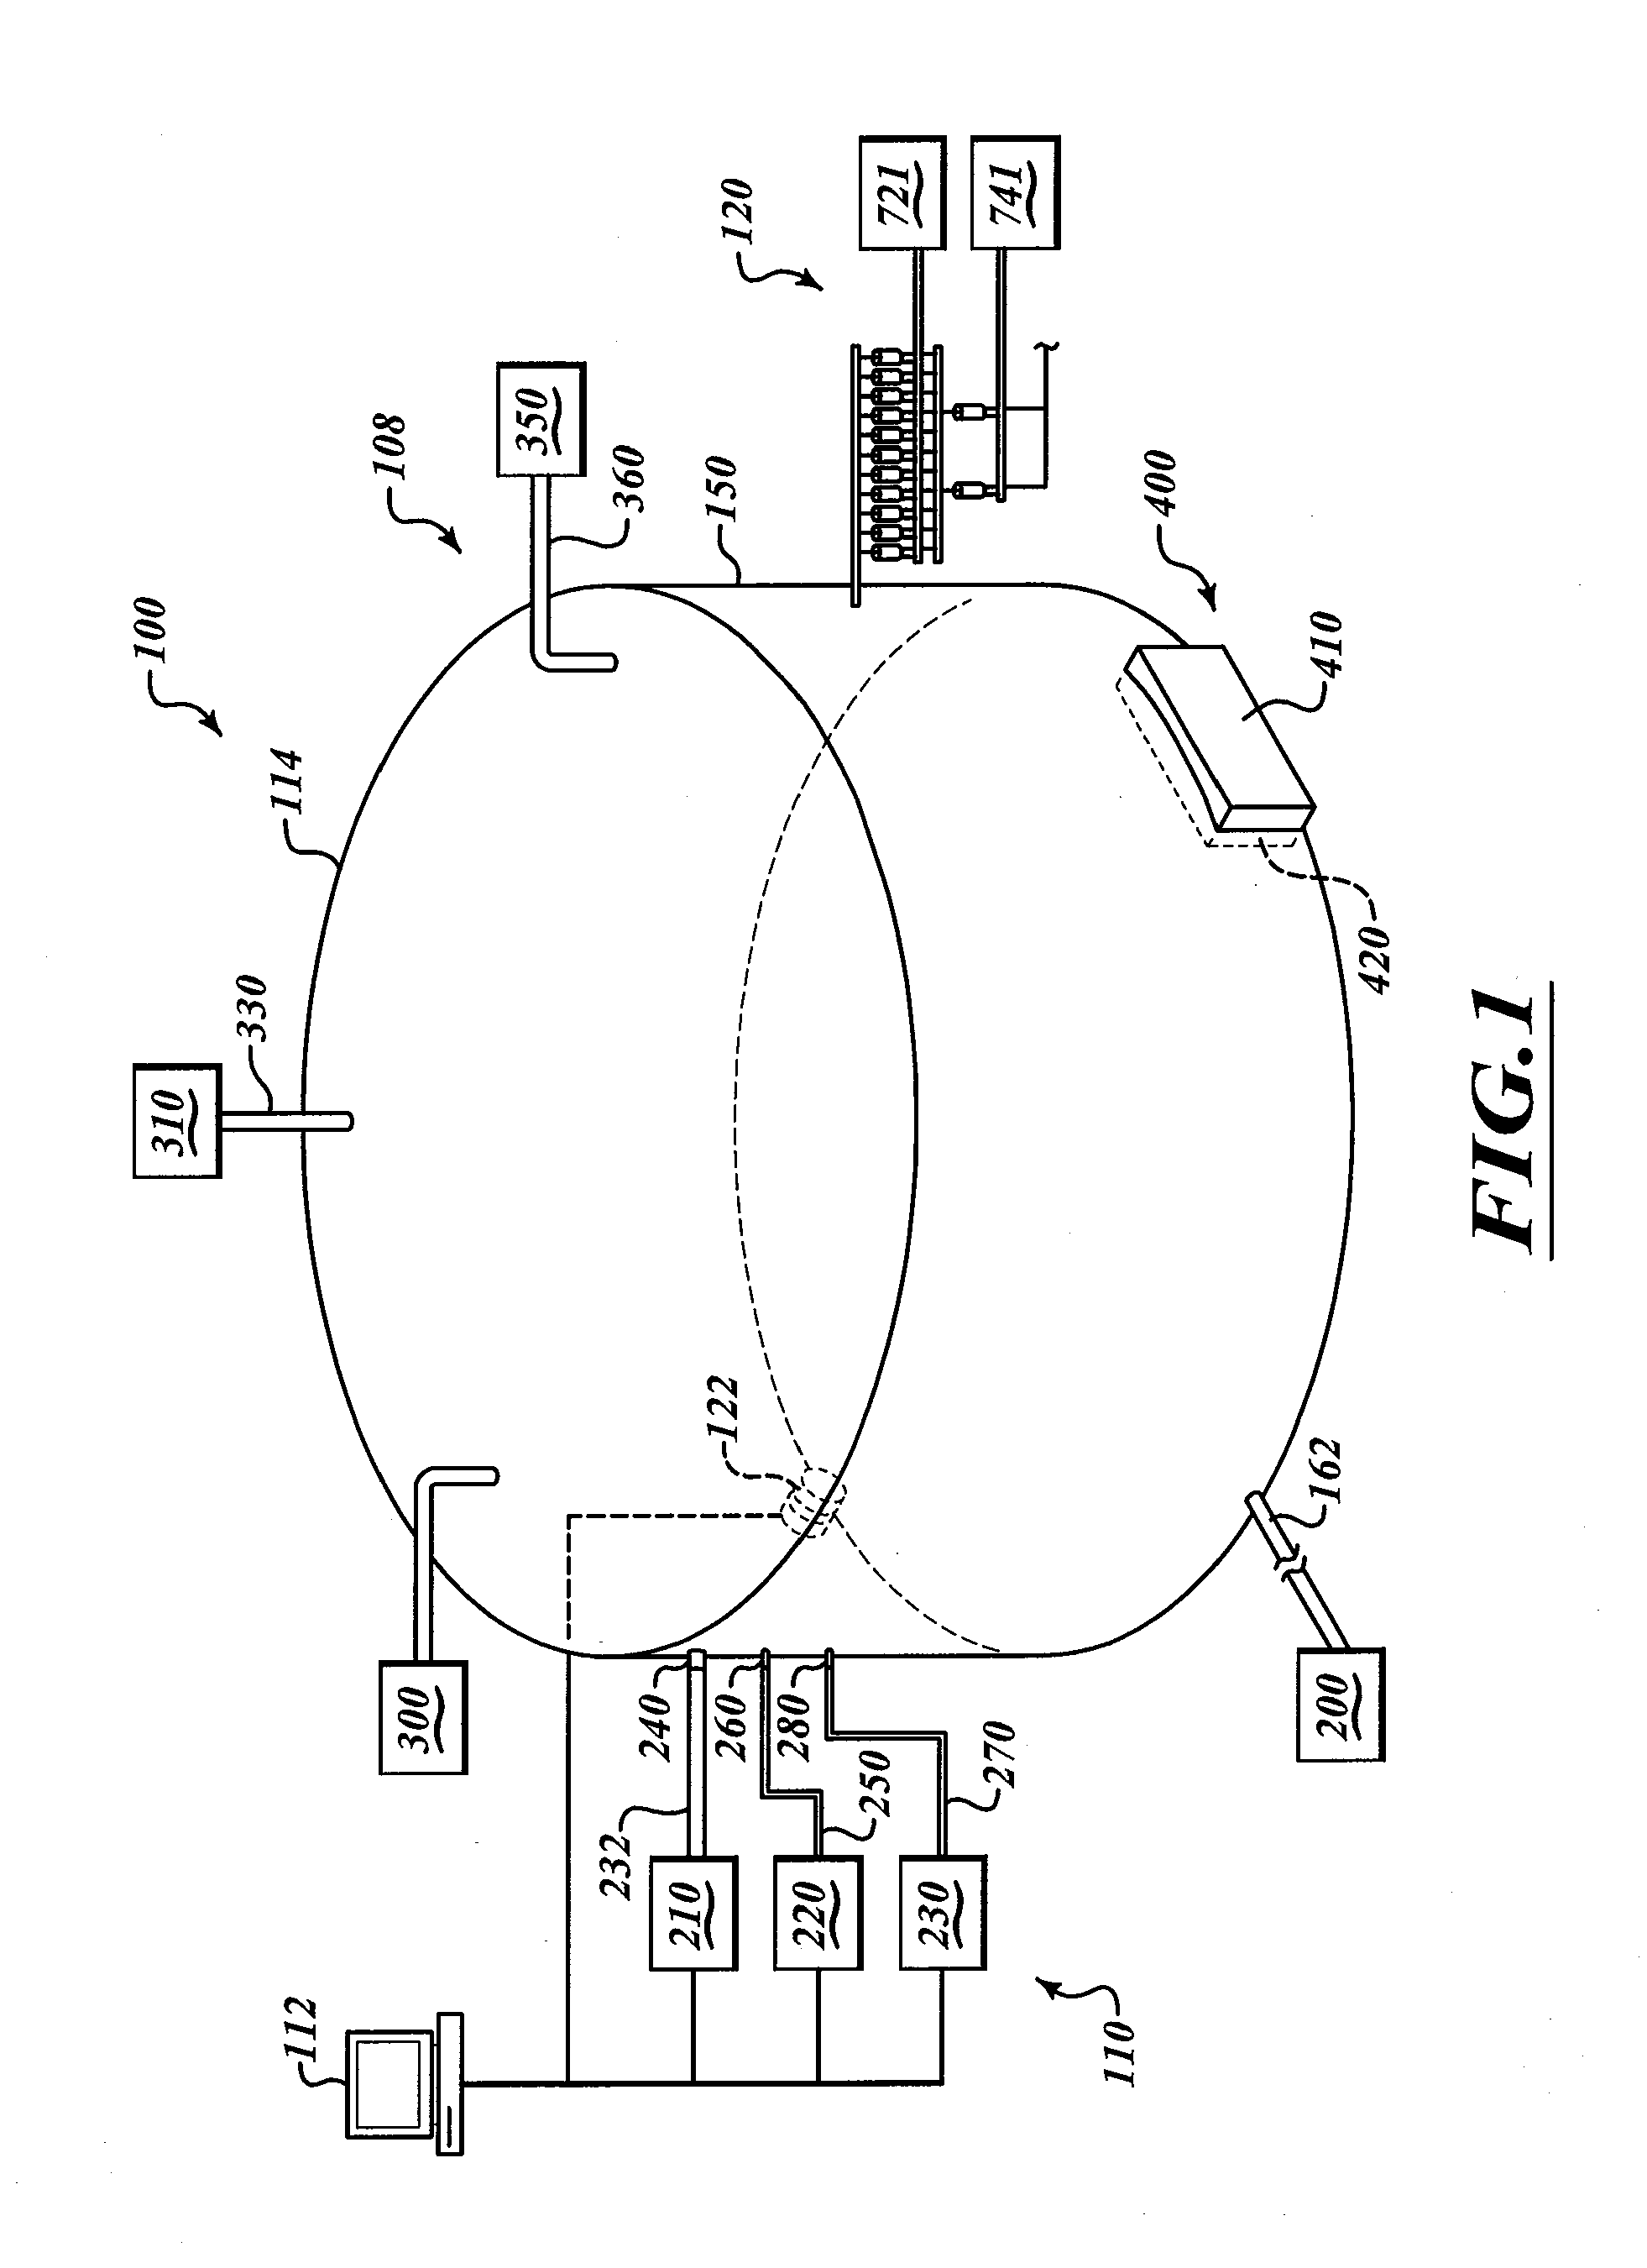 Method and system for processing a biomass for producing biofuels and other products